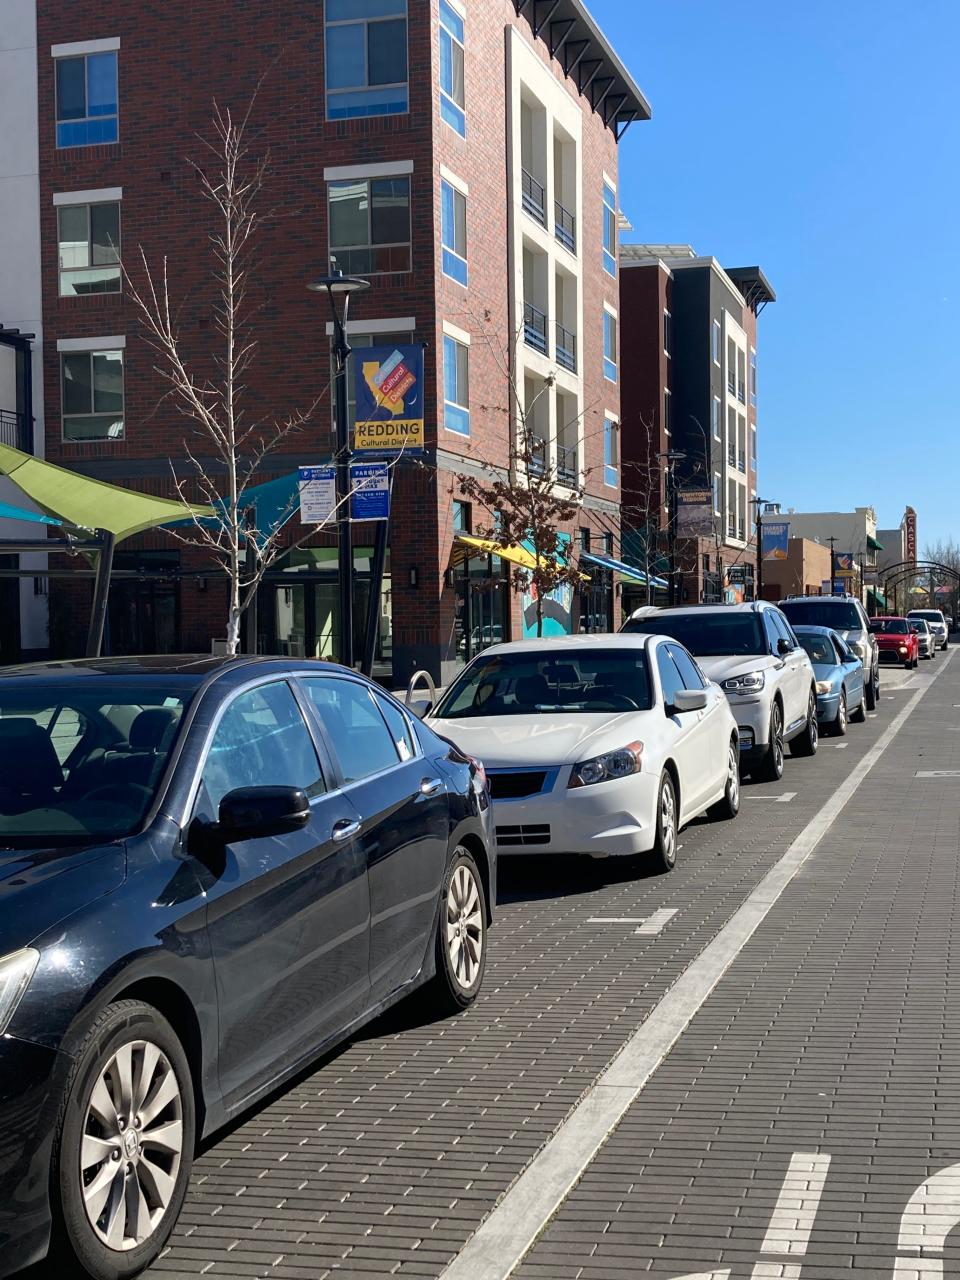 There were not a lot of empty parking spaces on Market Street in front of the Market Center building. City officials hope that when metered parking is enforced it will free up spaces like this for businesses in the area.